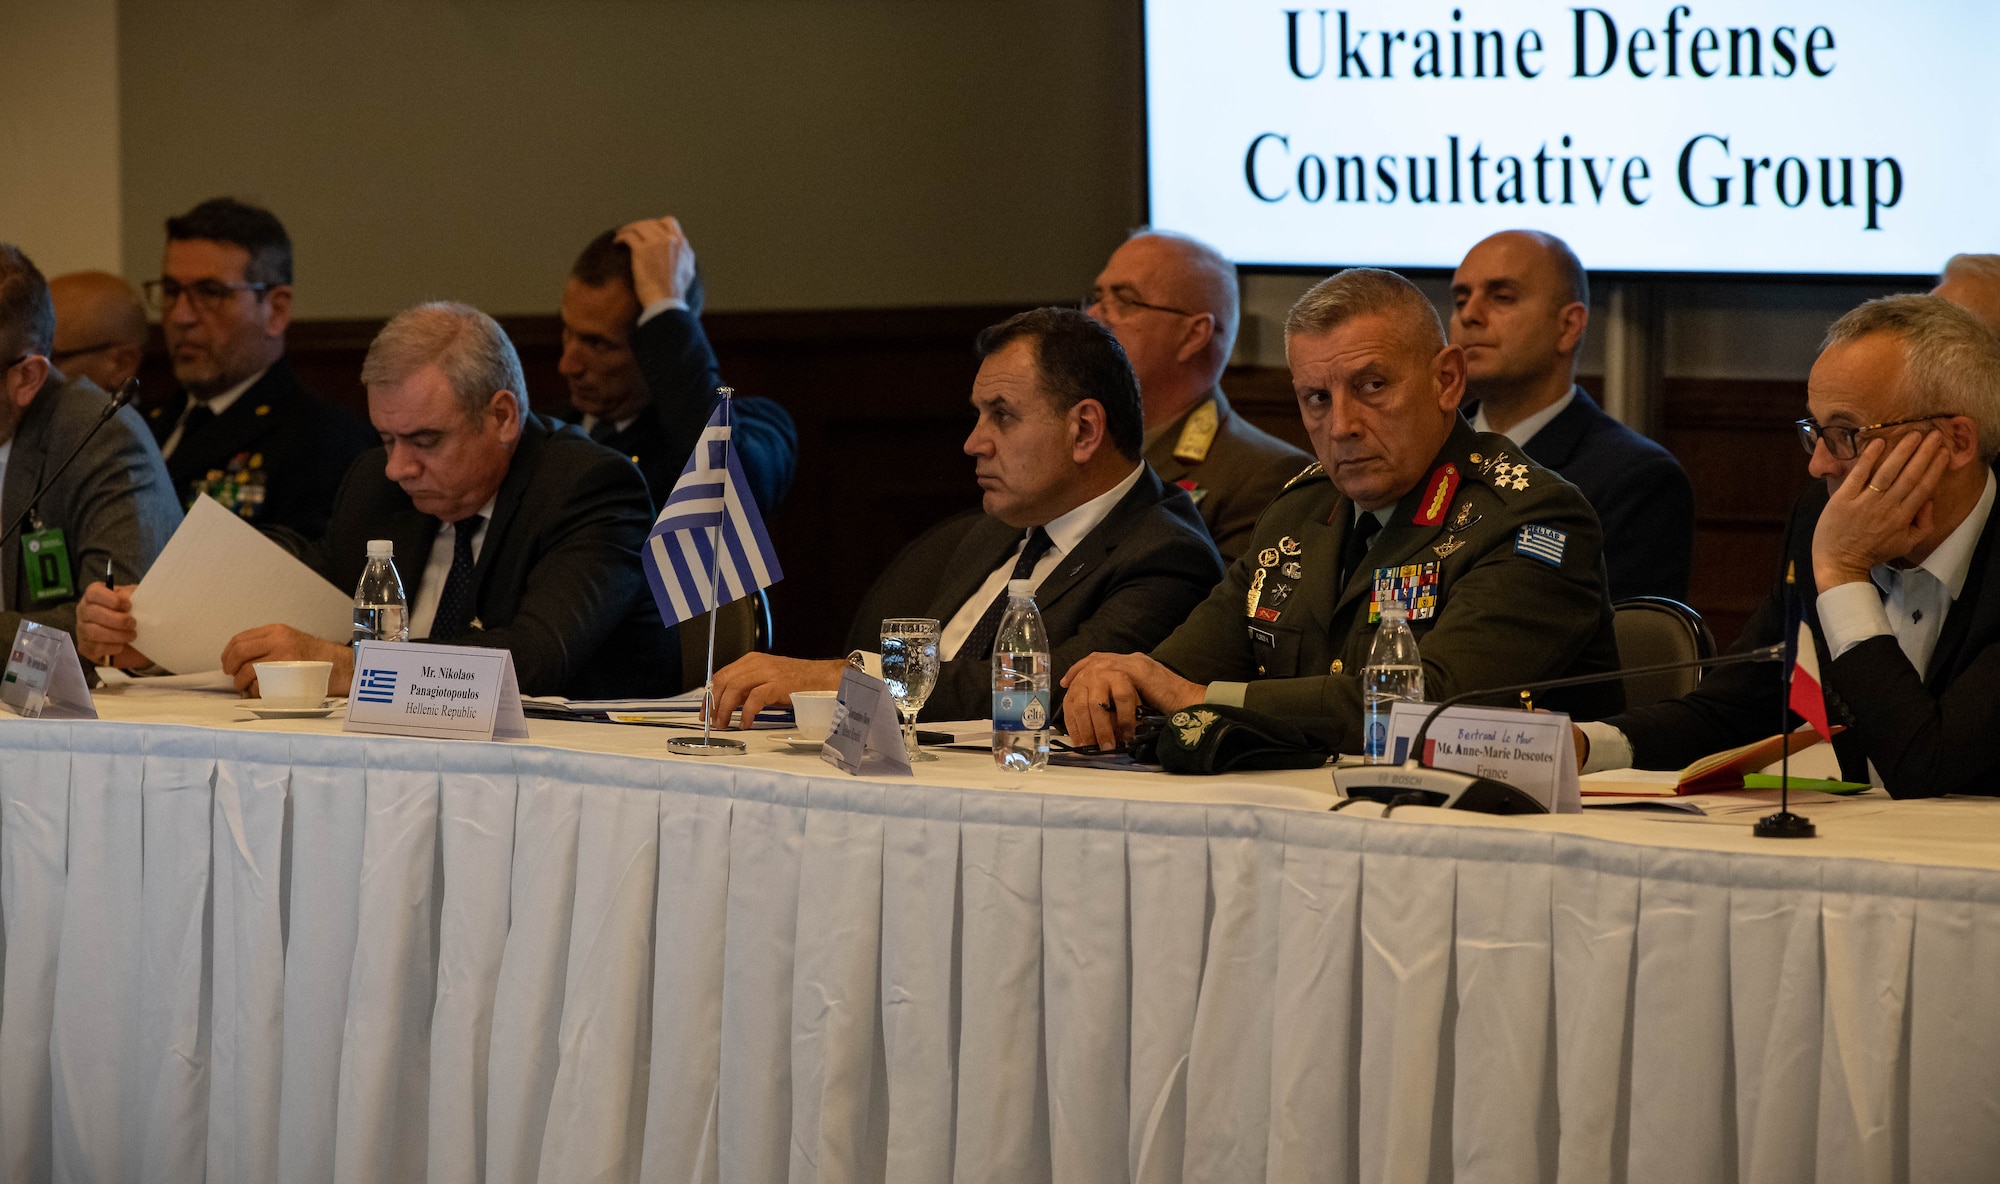 Ministers of defense and senior military officials discuss the ongoing crisis in Ukraine during the Ukraine Defense Consultative Group event at Ramstein Air Base, Germany, April 26, 2022. The United States continues to reaffirm its unwavering support for Ukraine's sovereignty and territorial integrity. (U.S. Air Force photo by Airman 1st Class Jared Lovett)